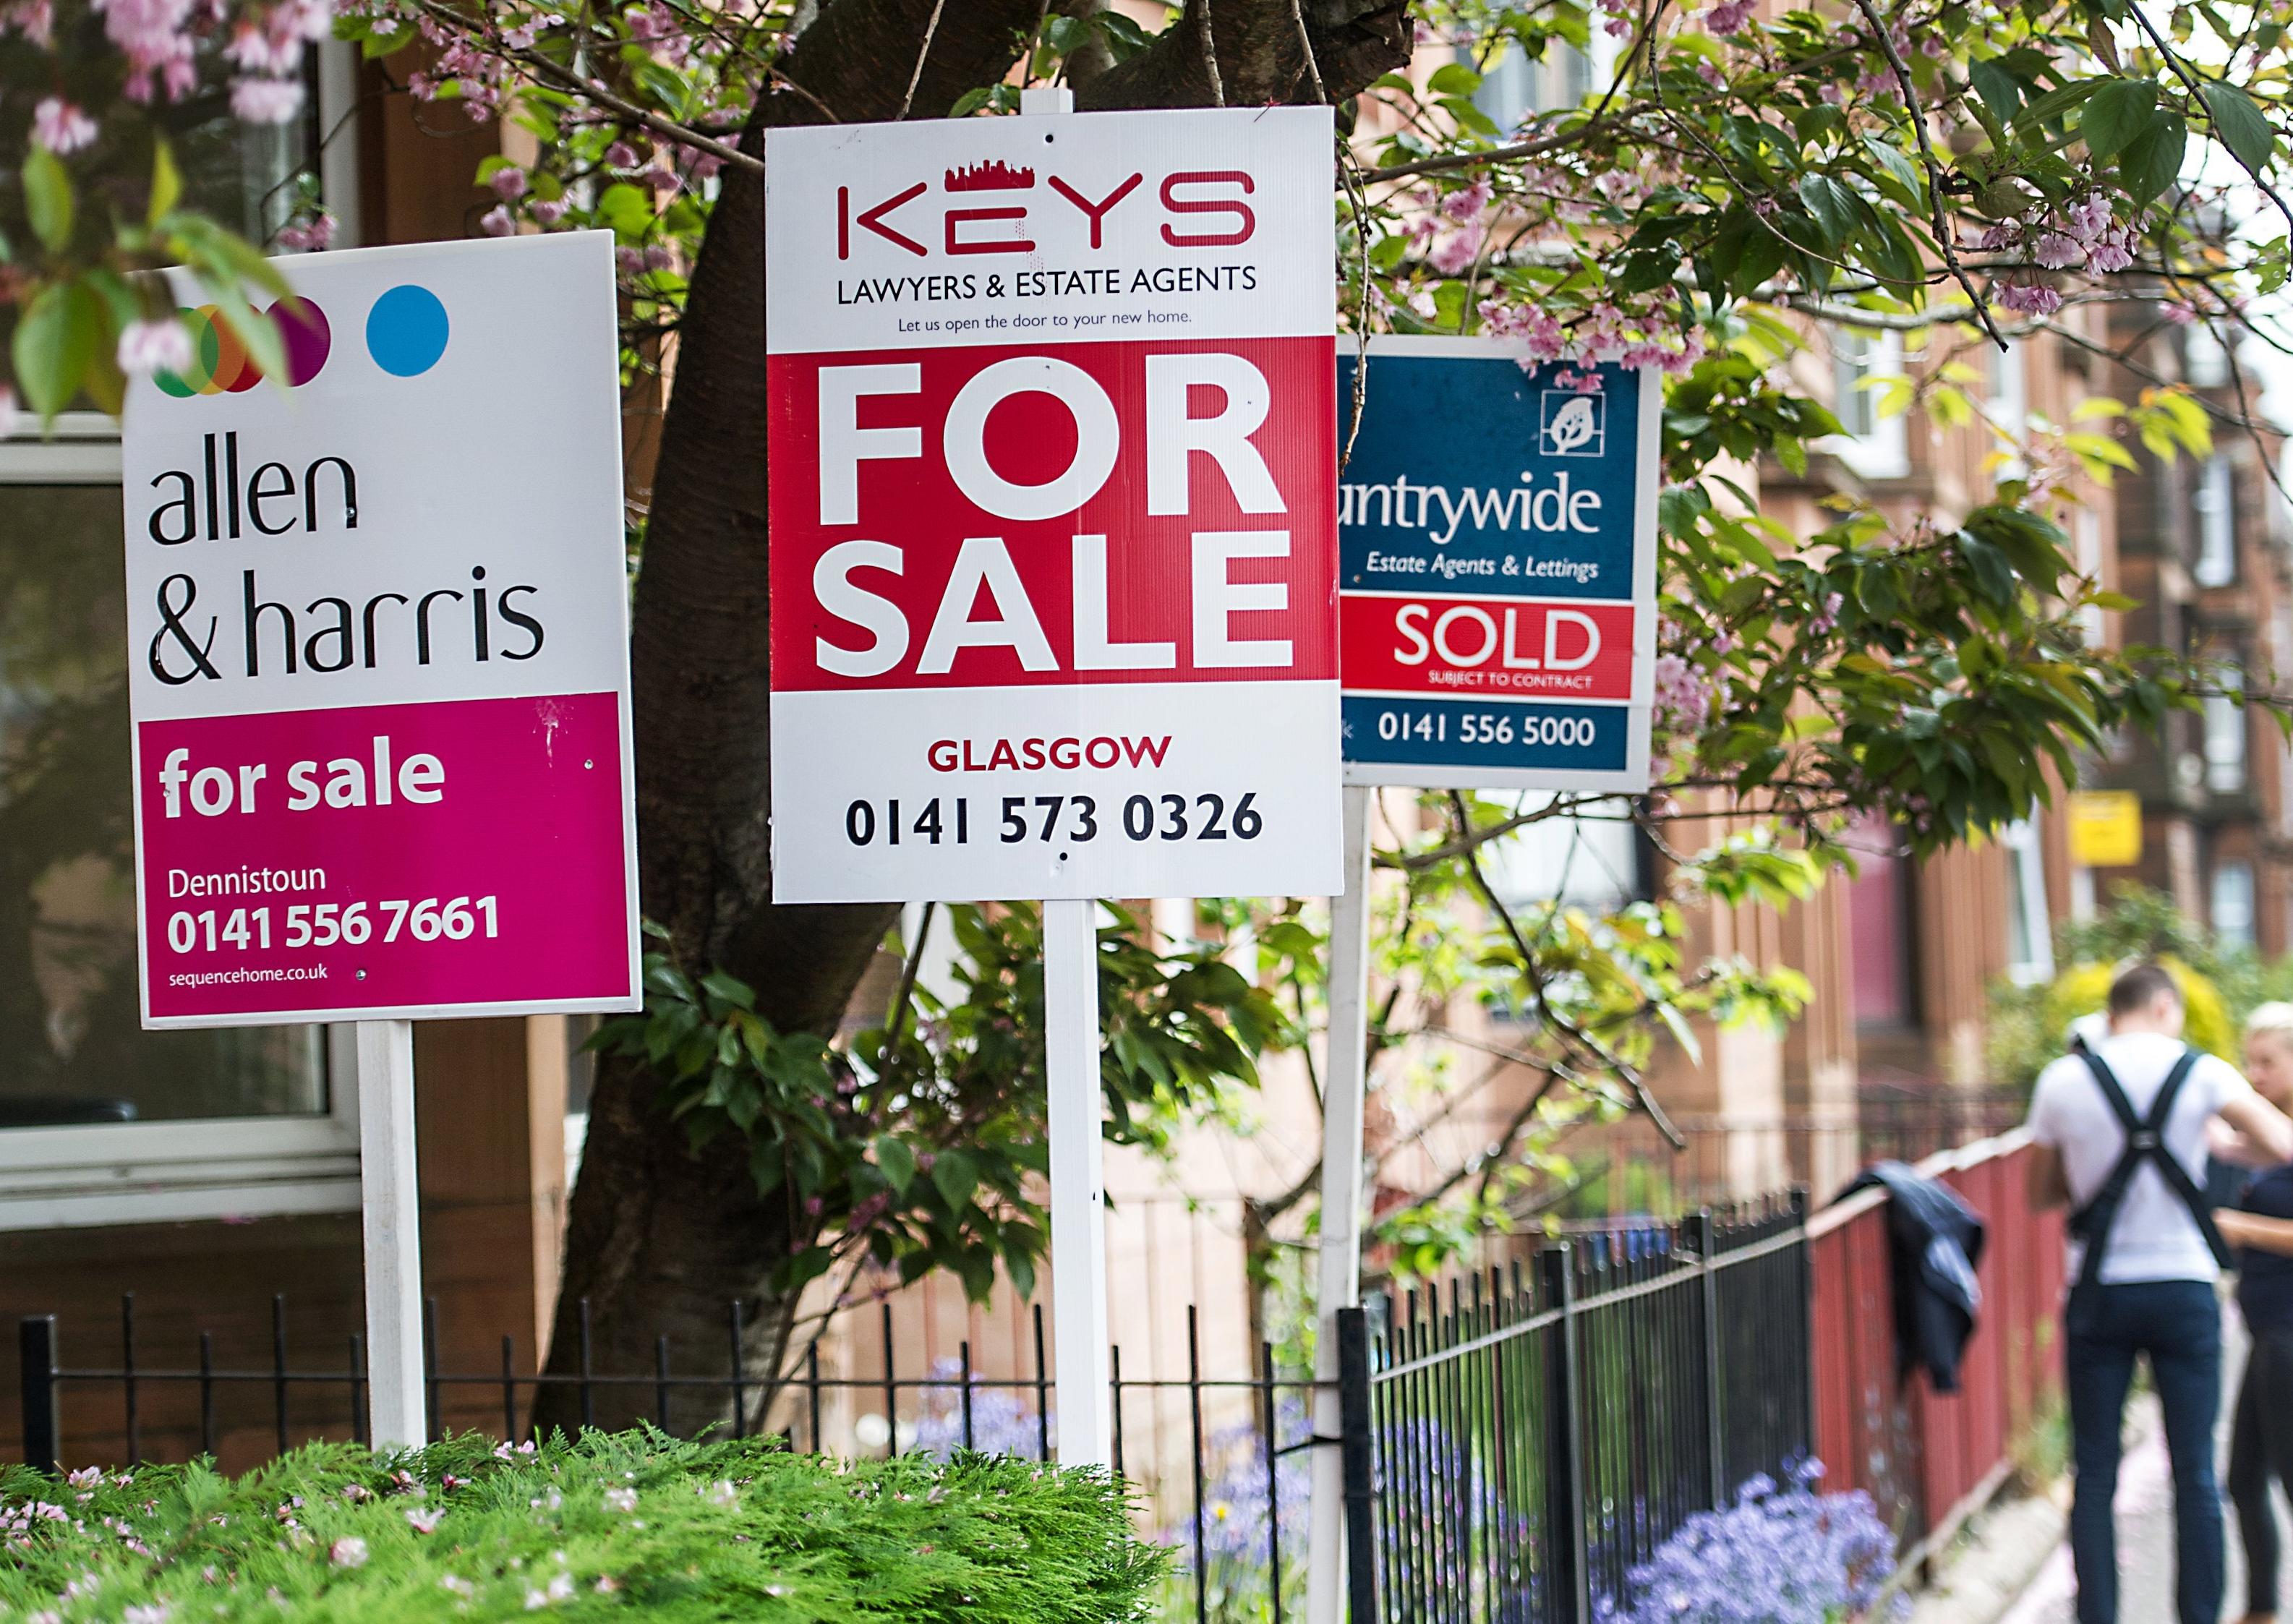 House price growth forecast to stall in 2021 | The Scotsman